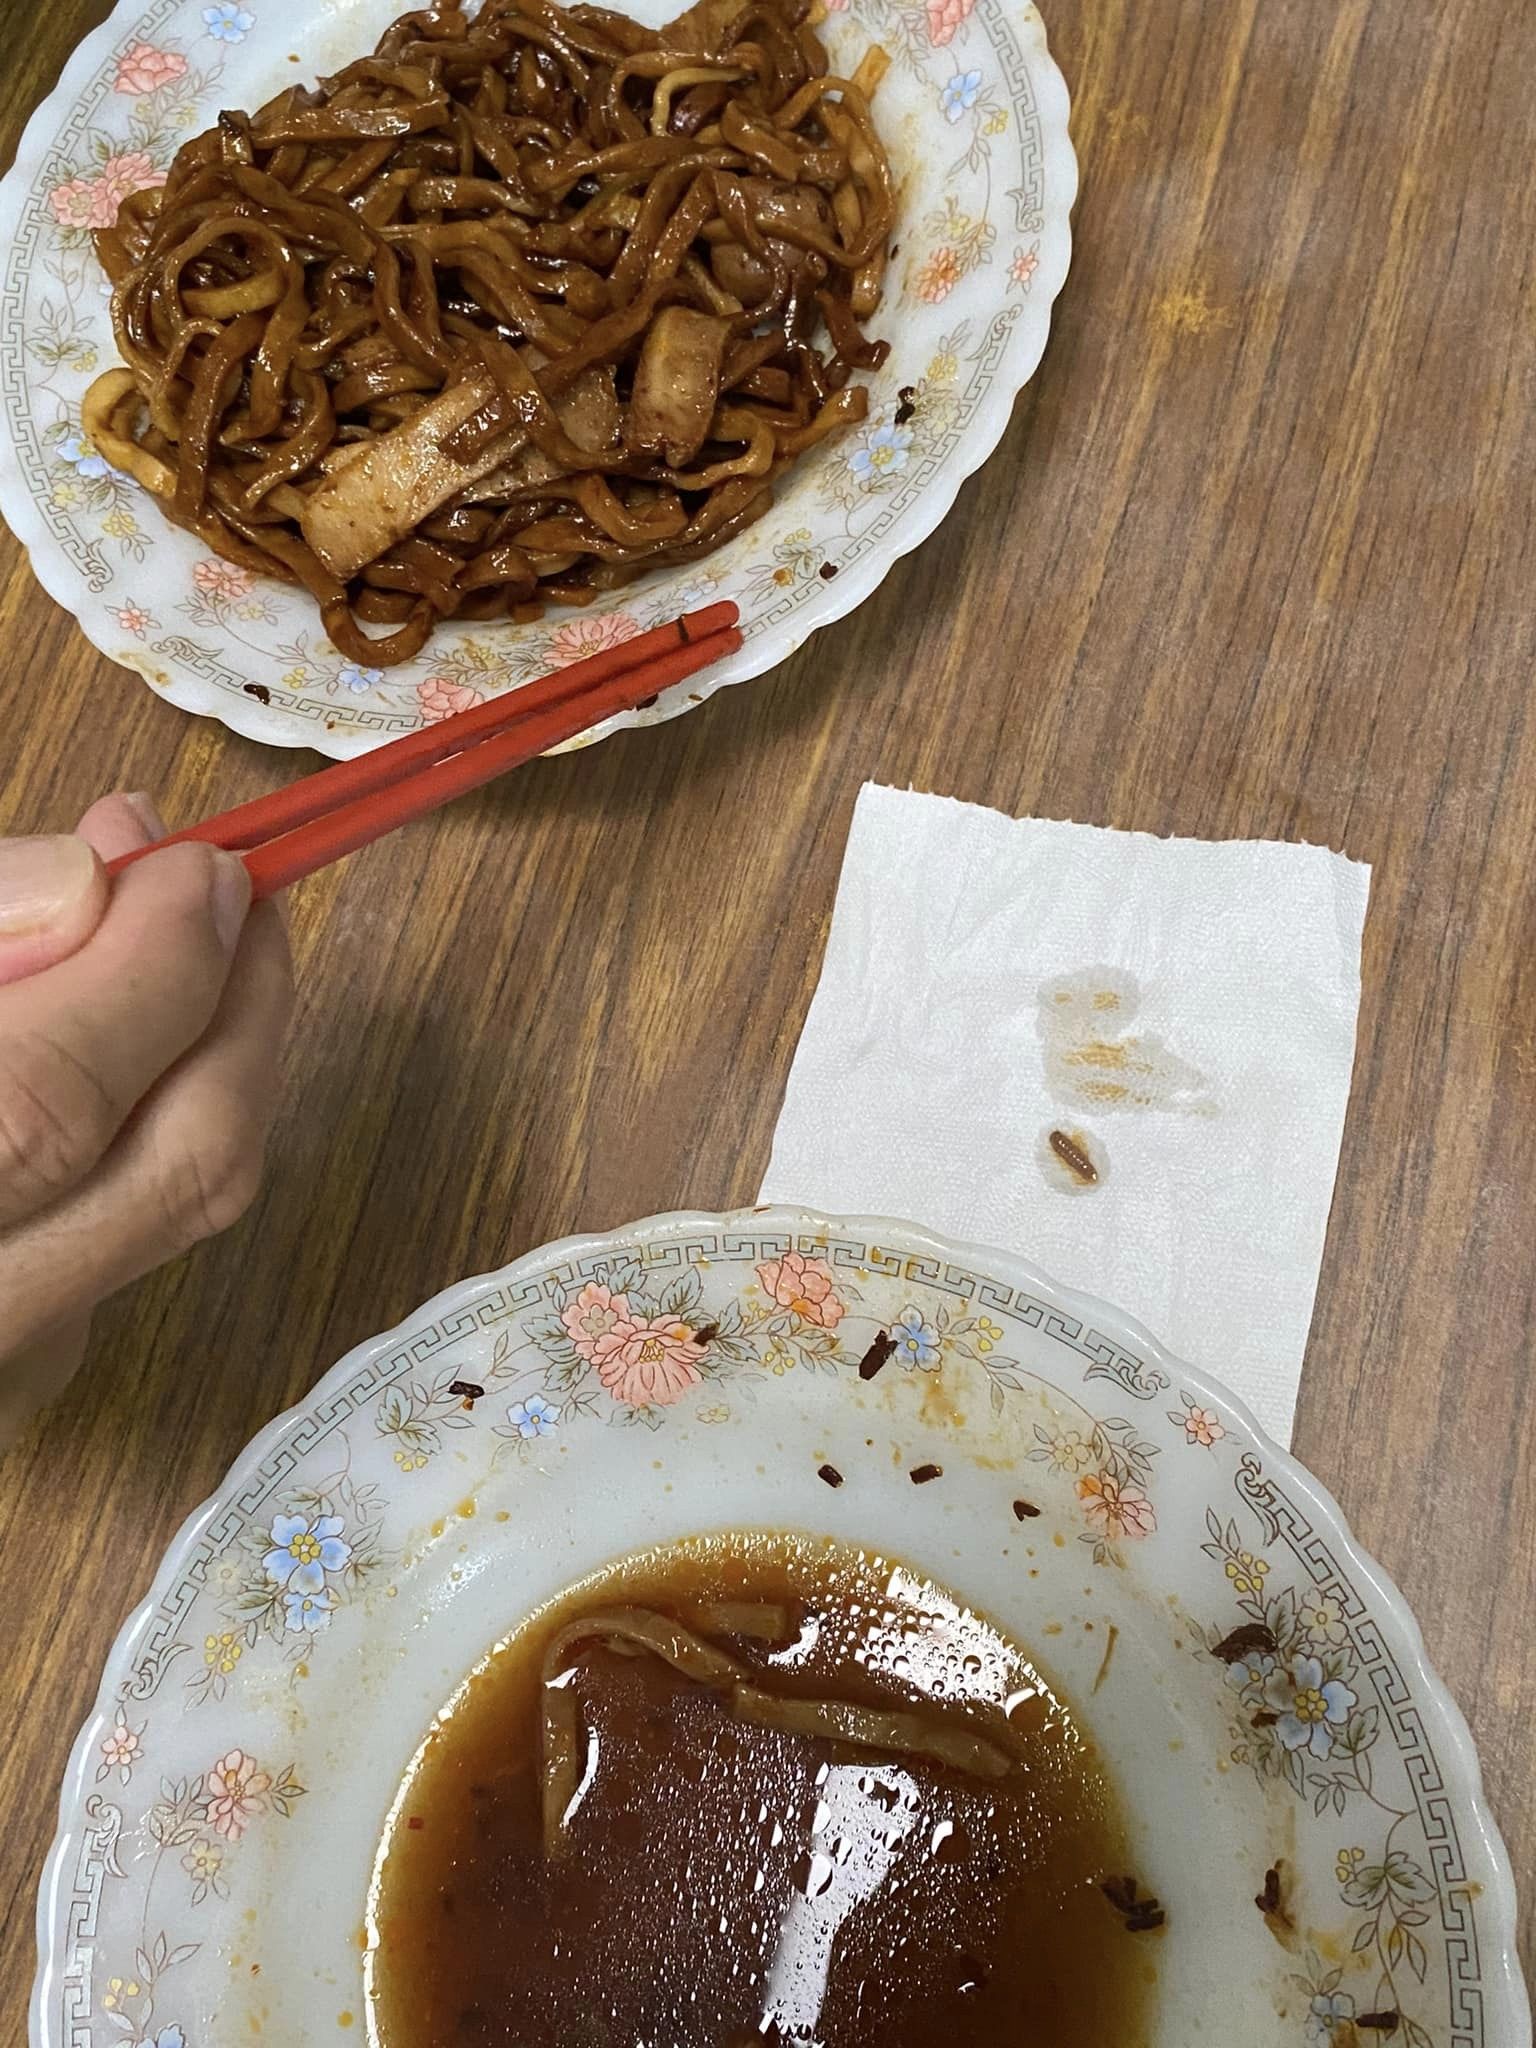 Msian showing insects found in their noodles meal